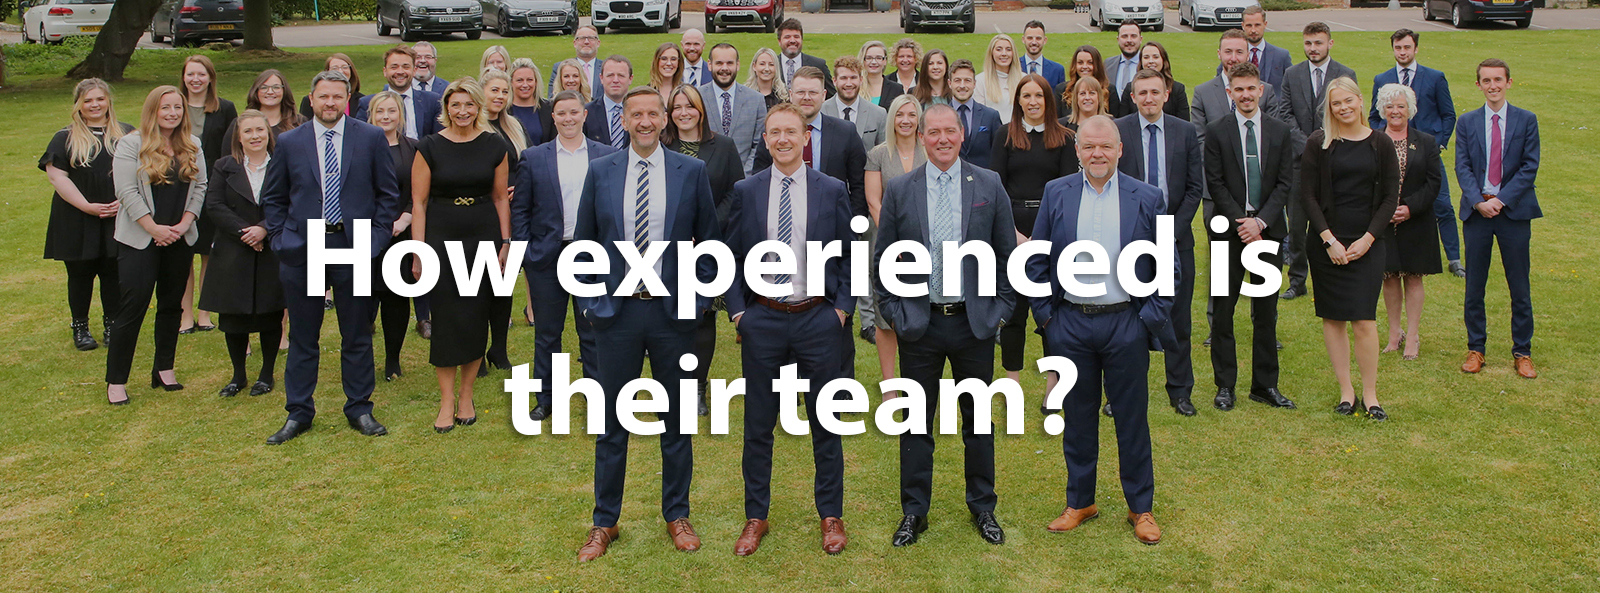 The Property Centre - How experienced is their team?